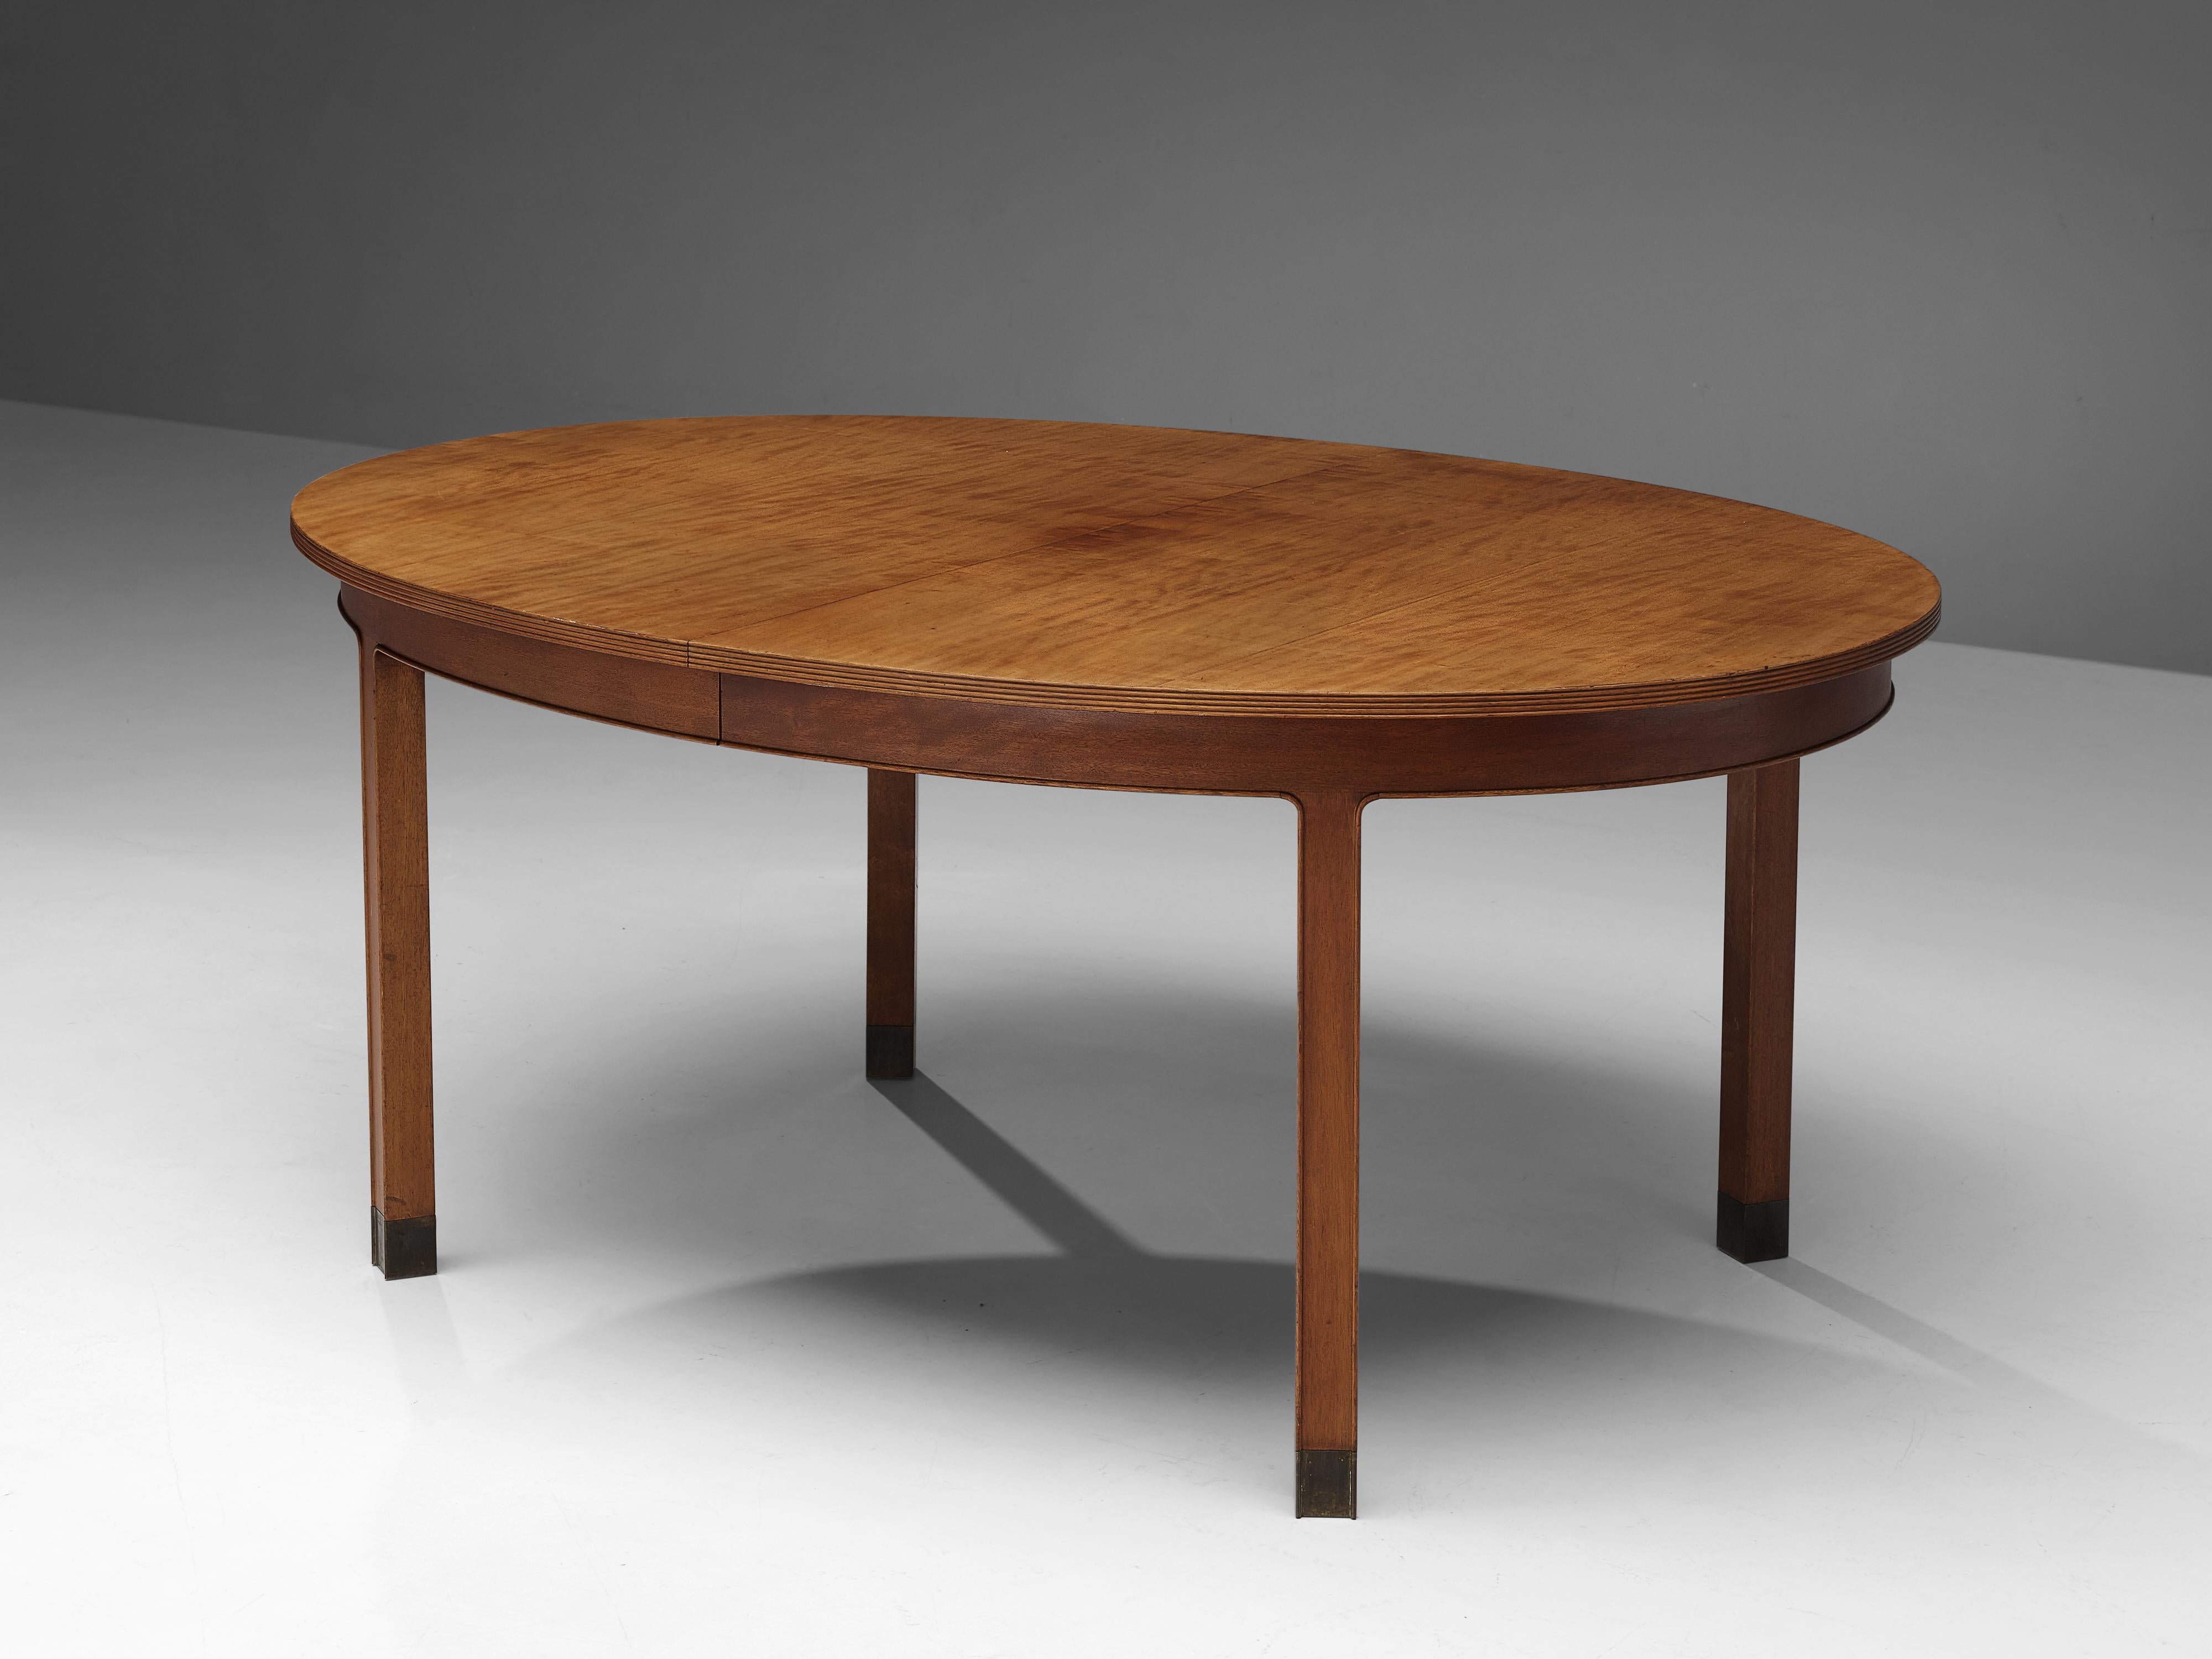 Dining table, mahogany, walnut, brass, Denmark, 1950s.

This elegant dining table has a wonderful oval top resting on four legs with carved edges and brass feet. Underneath the tabletop a functional and thought-through mechanism can be found that